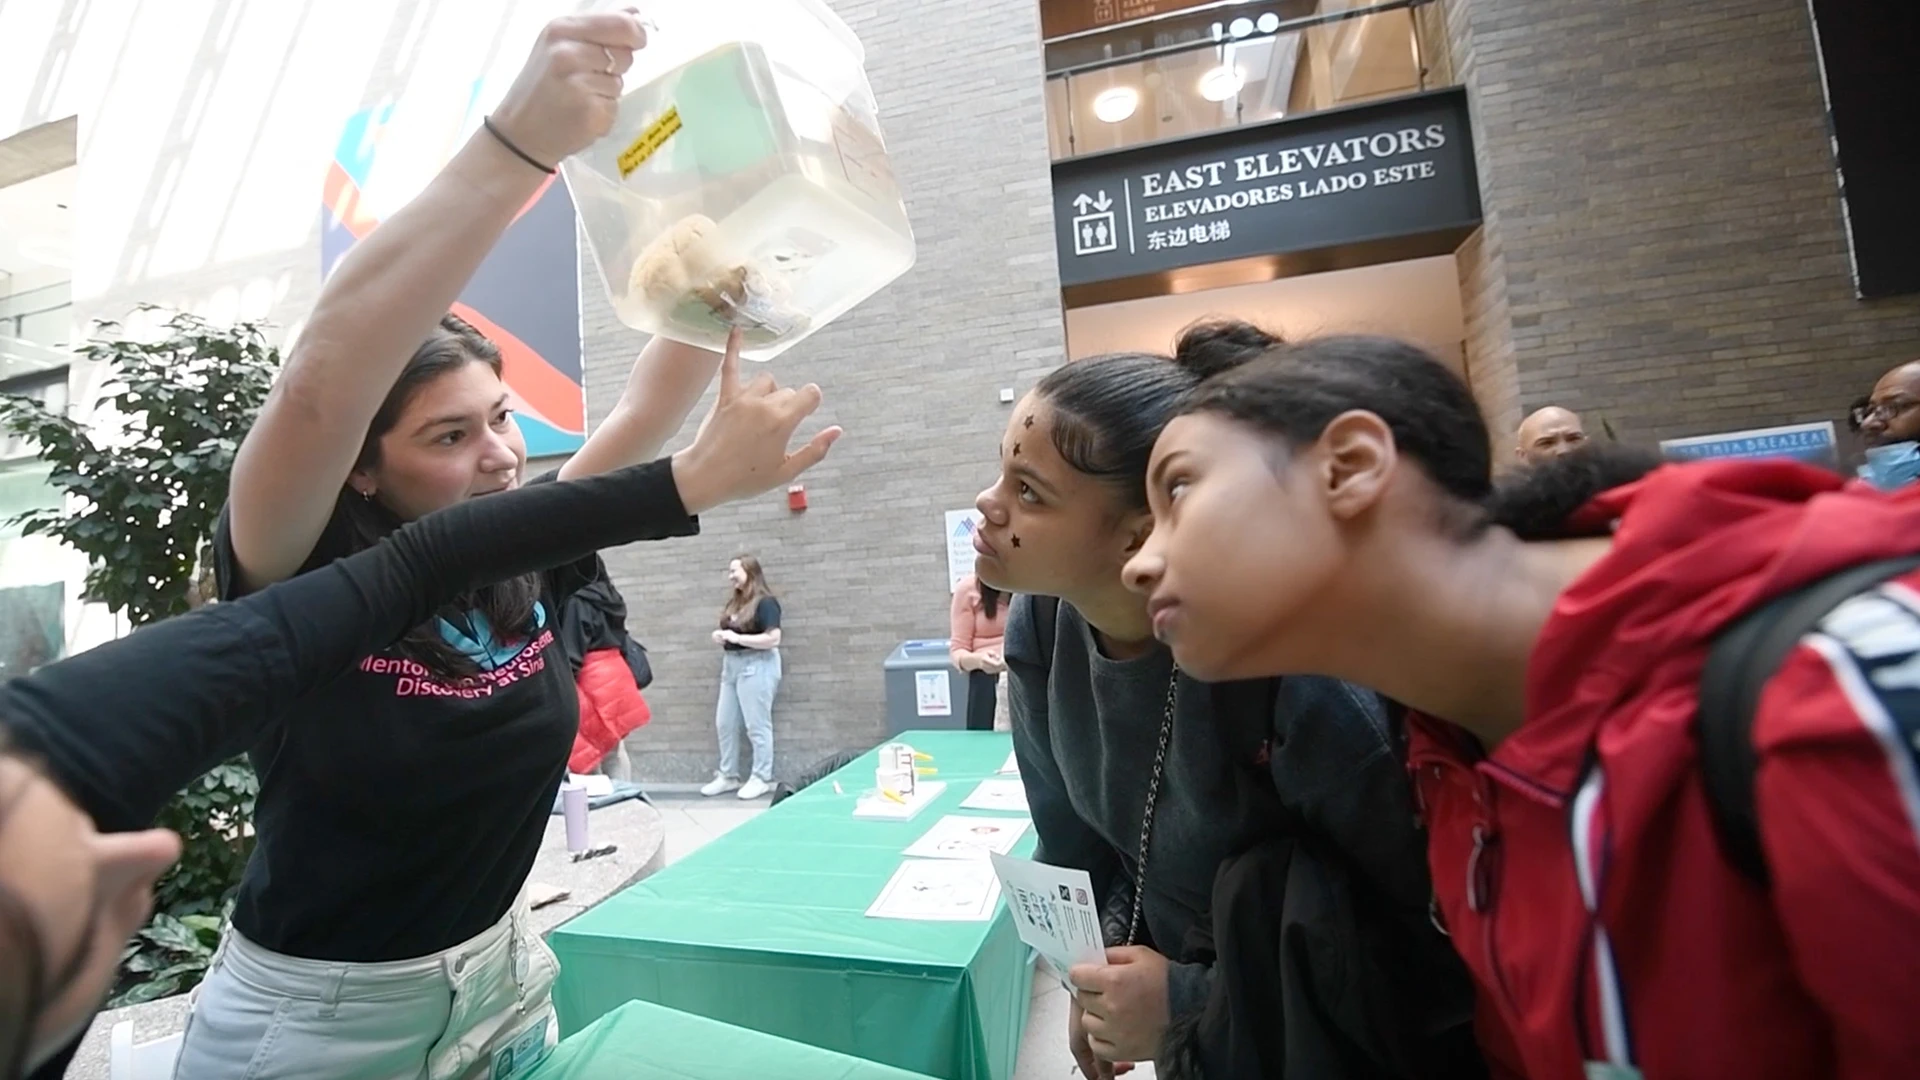 Students were able to compare and learn about a variety of different brain specimens at the Brain Fair.